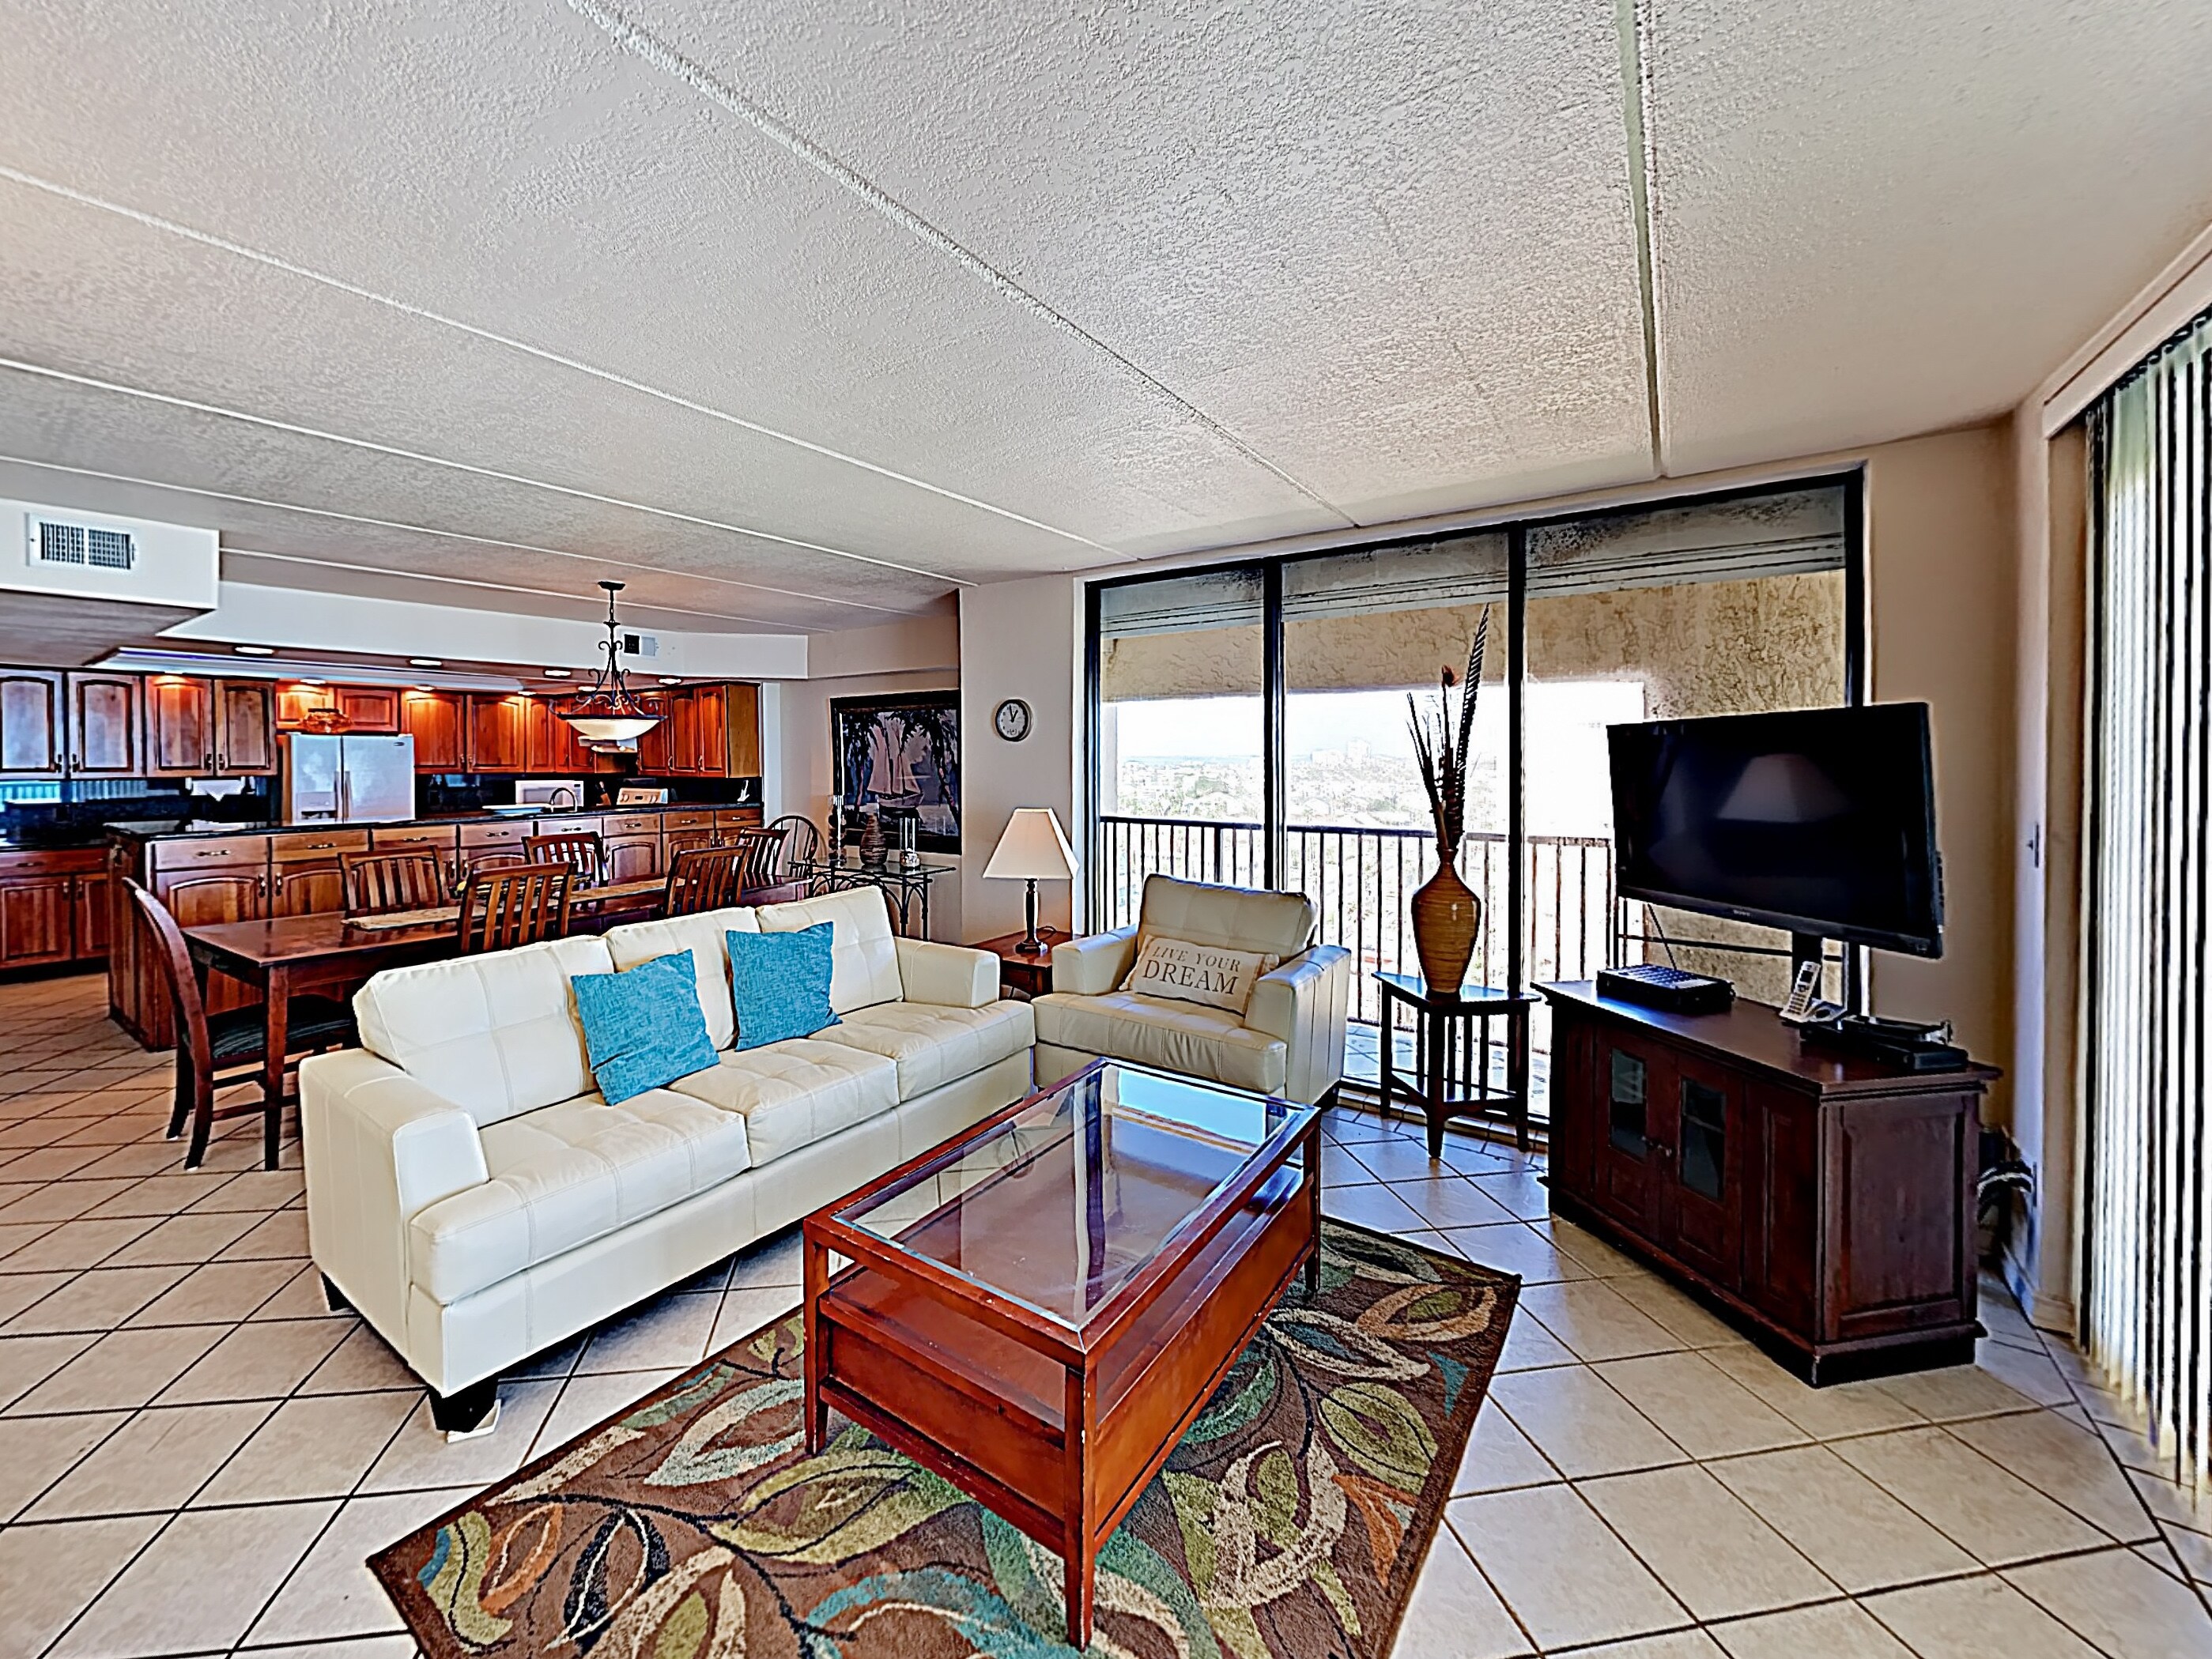 Welcome to Suntide III! This corner-unit condo is professionally managed by TurnKey Vacation Rentals.